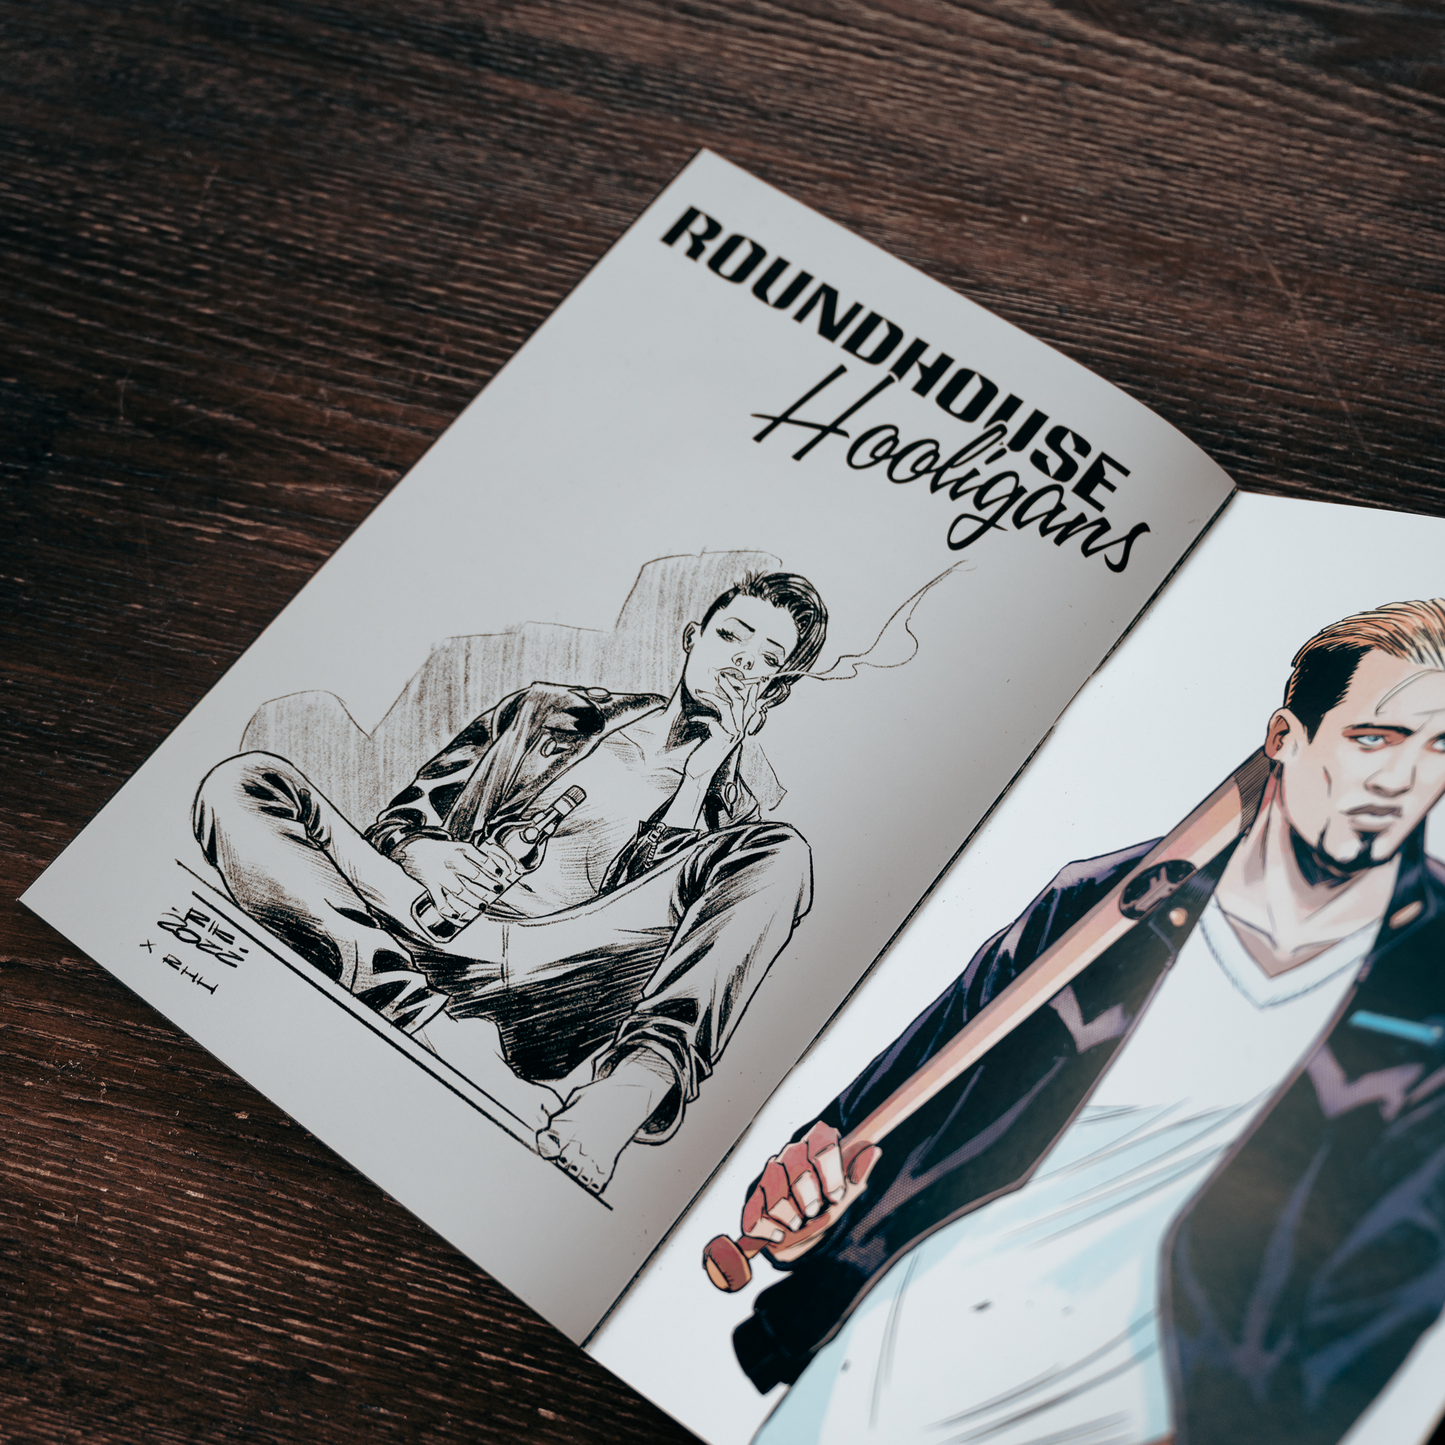 Roundhouse Hooligans Issue#2 Printed